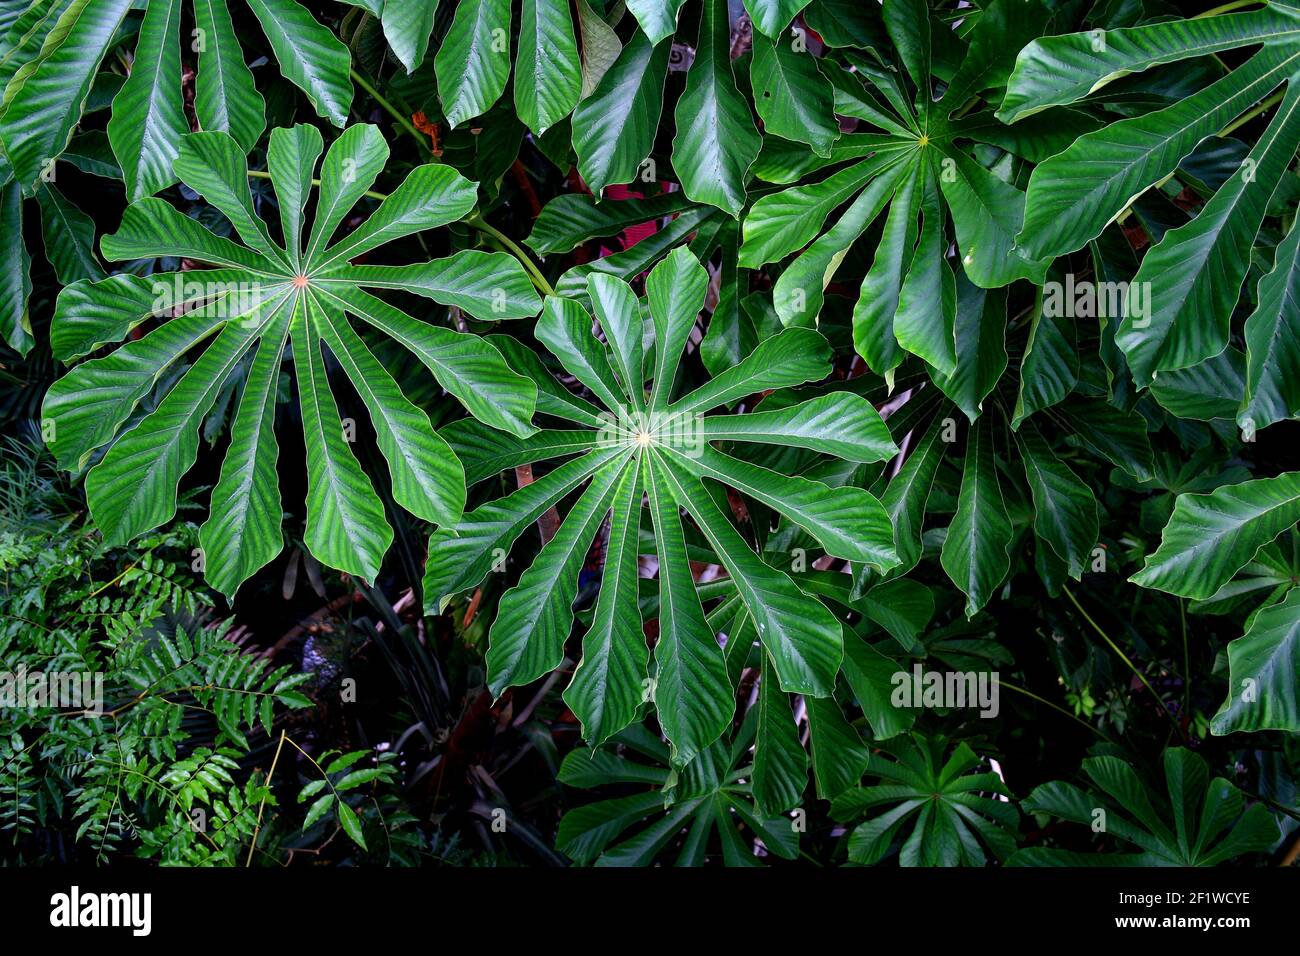 Close-up image of large green leaves of a geometric shape in a greenhouse Stock Photo